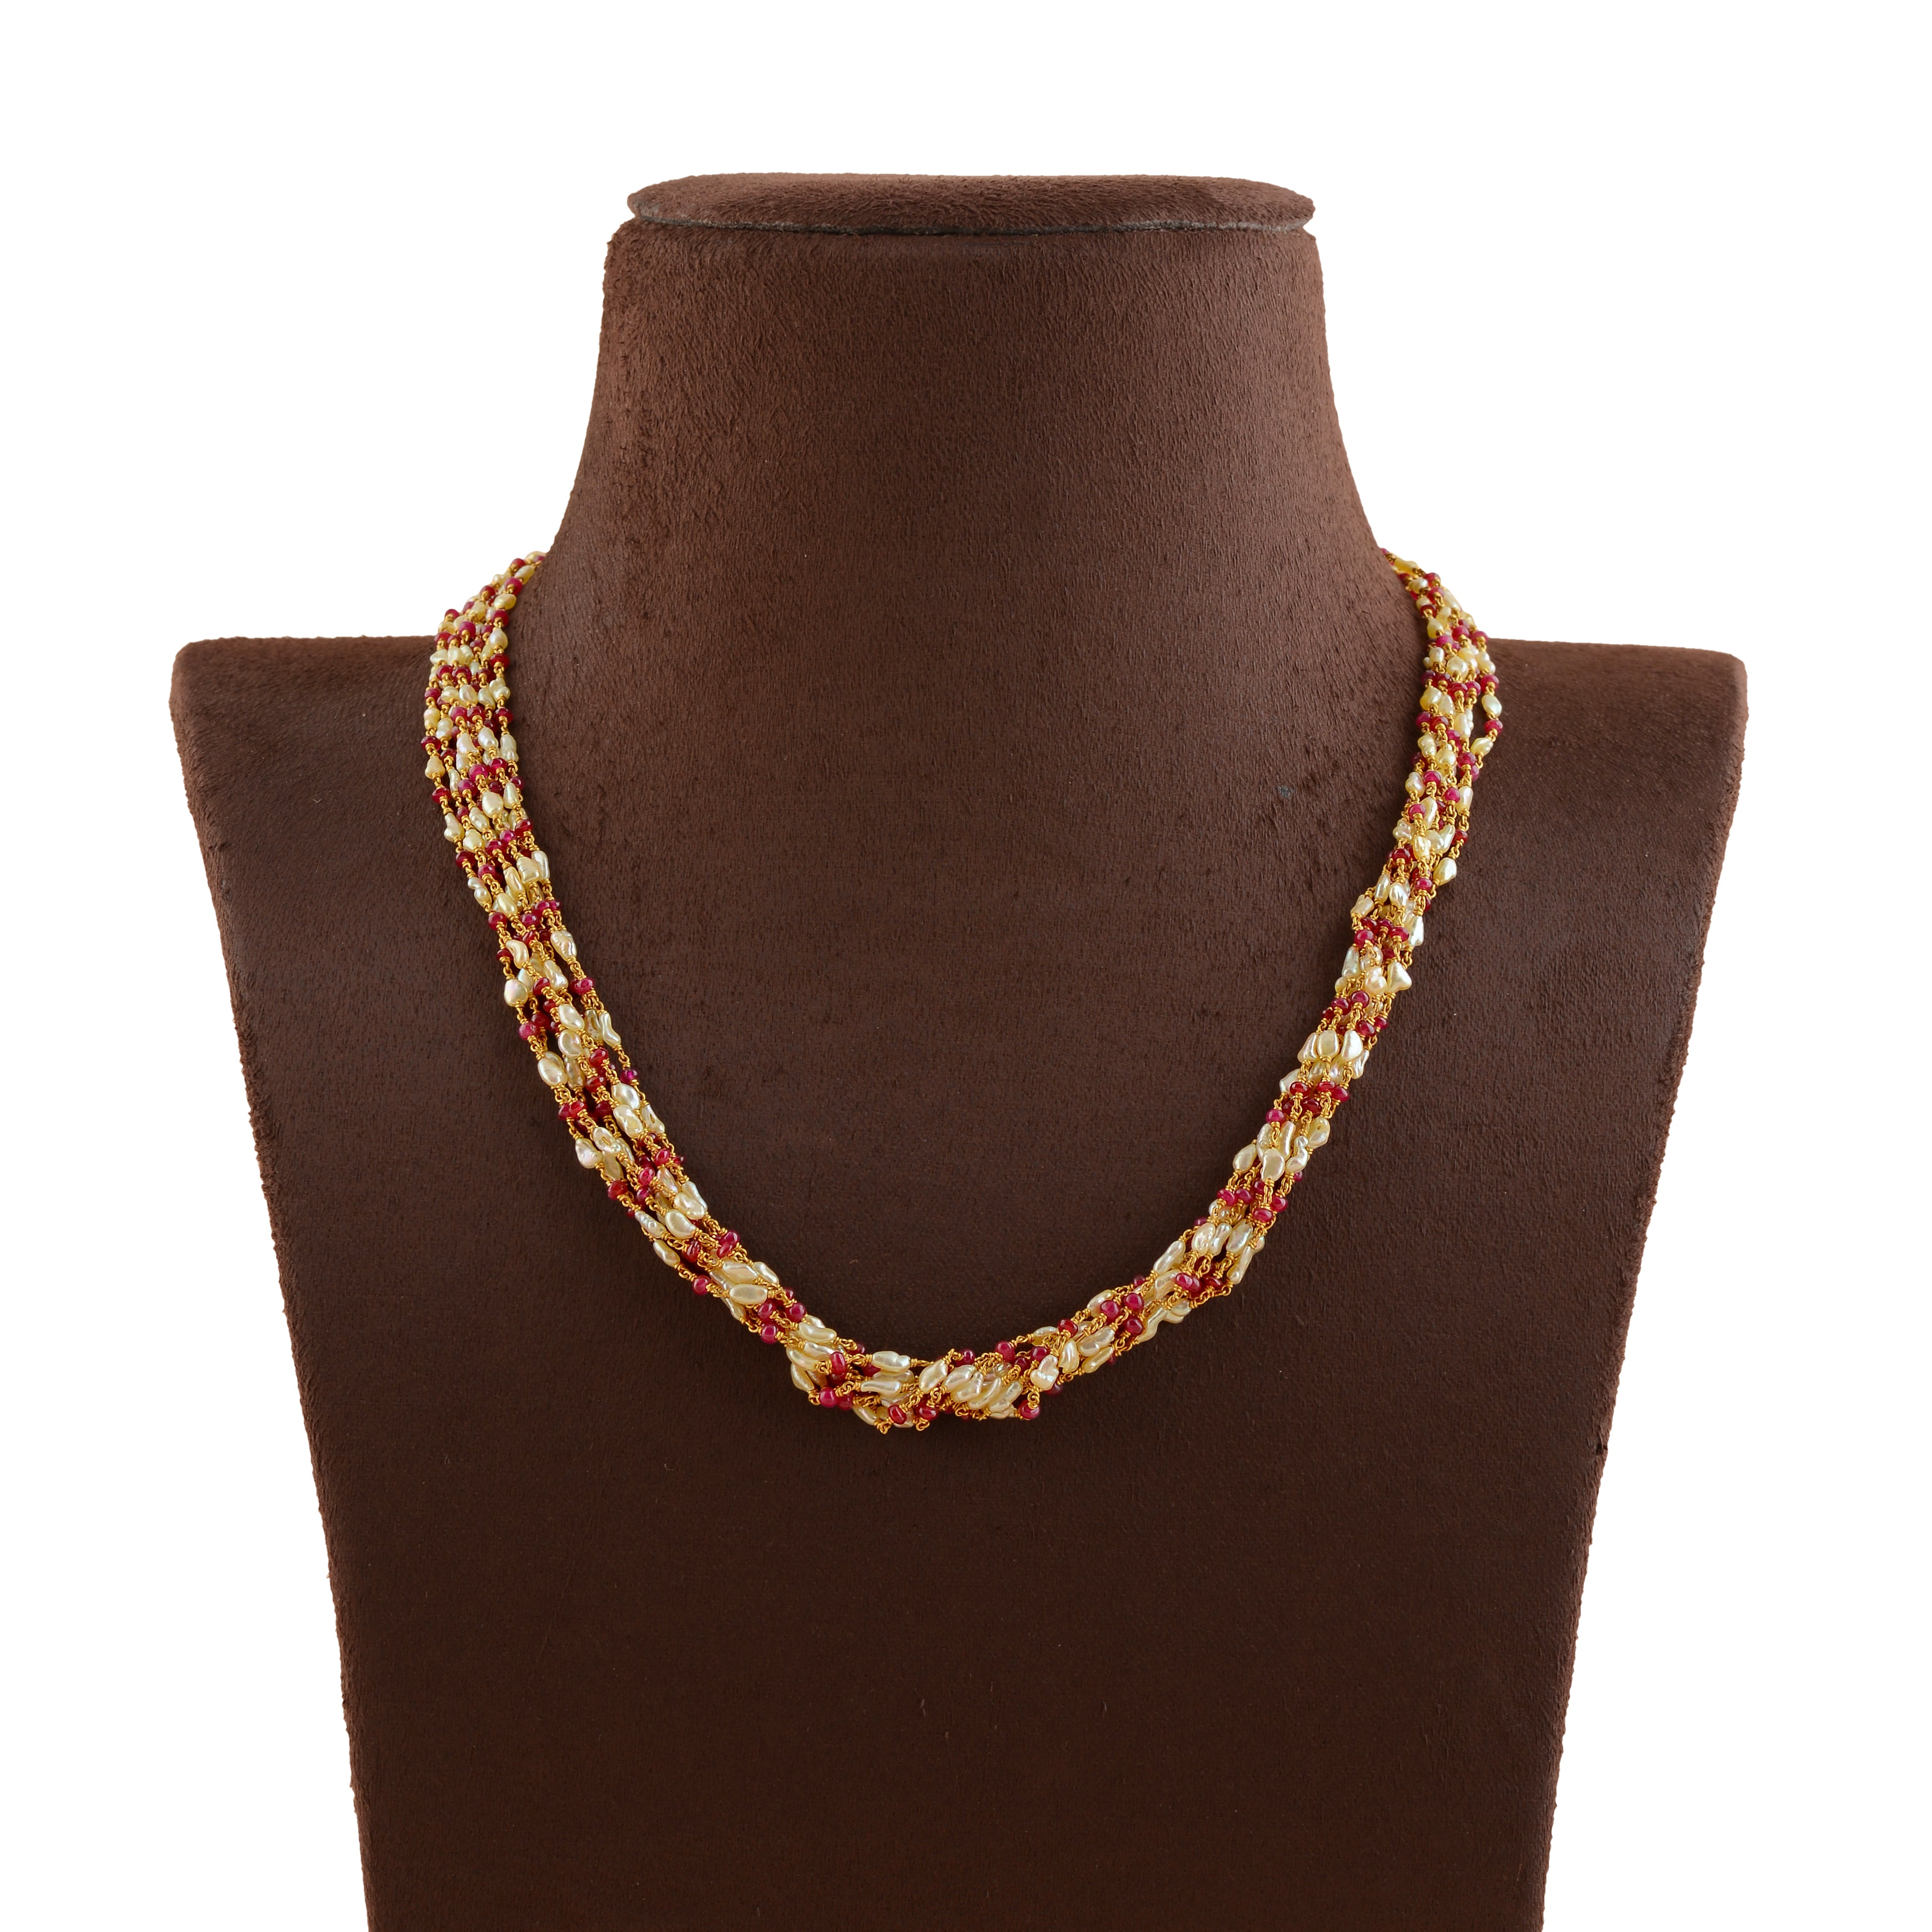 Octadic Keshi Pearl Necklace with Ruby Accents